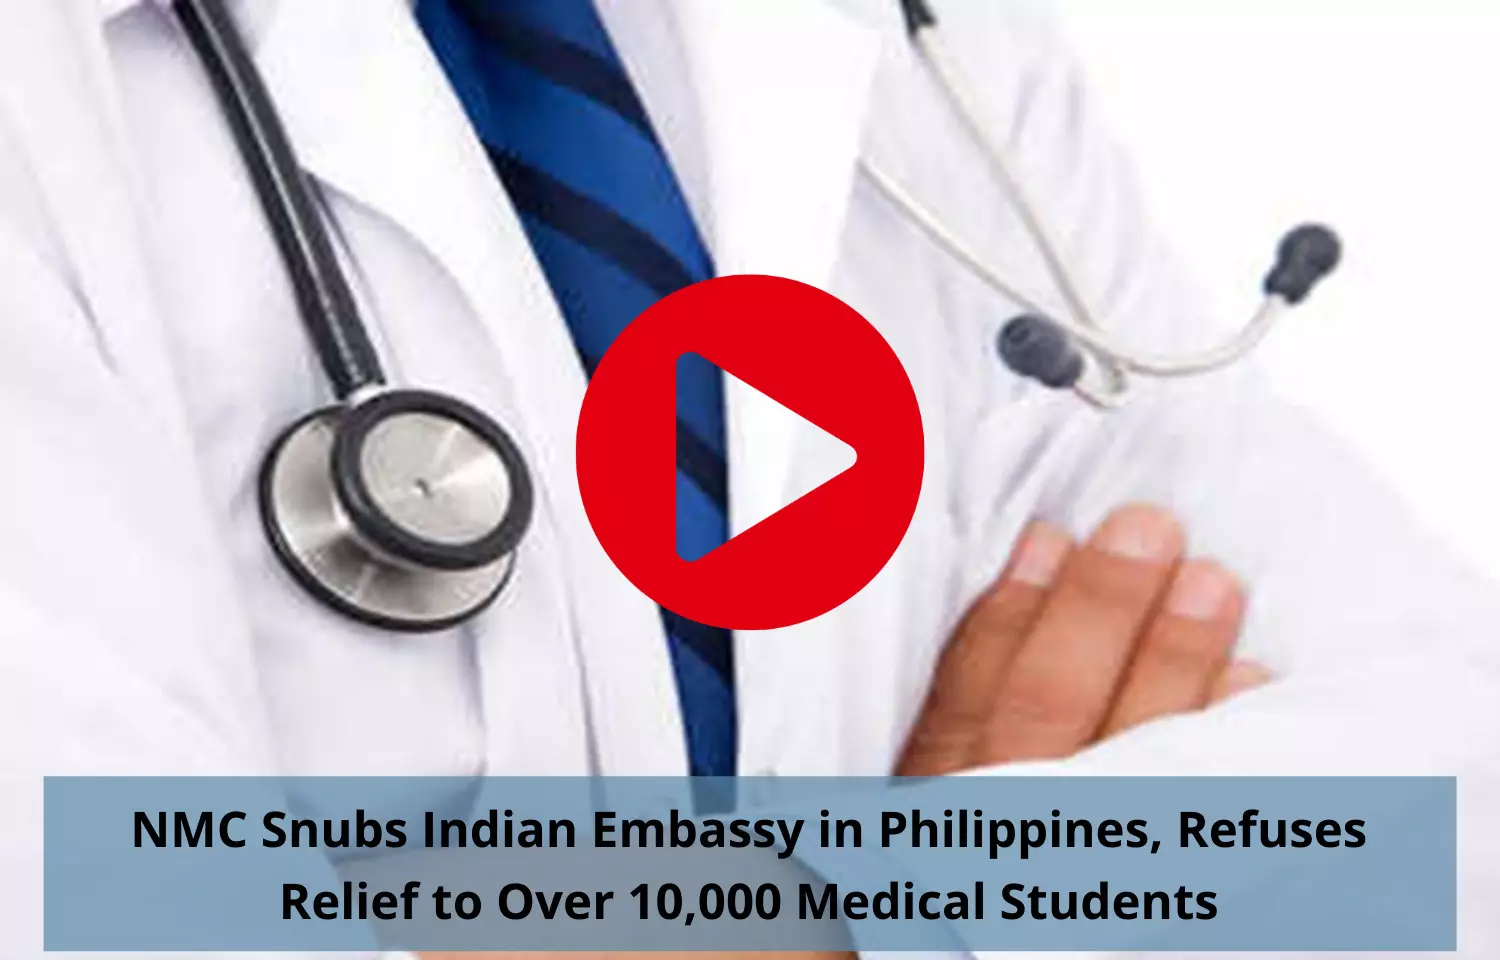 NMC snubs Indian Embassy in Philippines, refuses relief to over 10,000 medical students